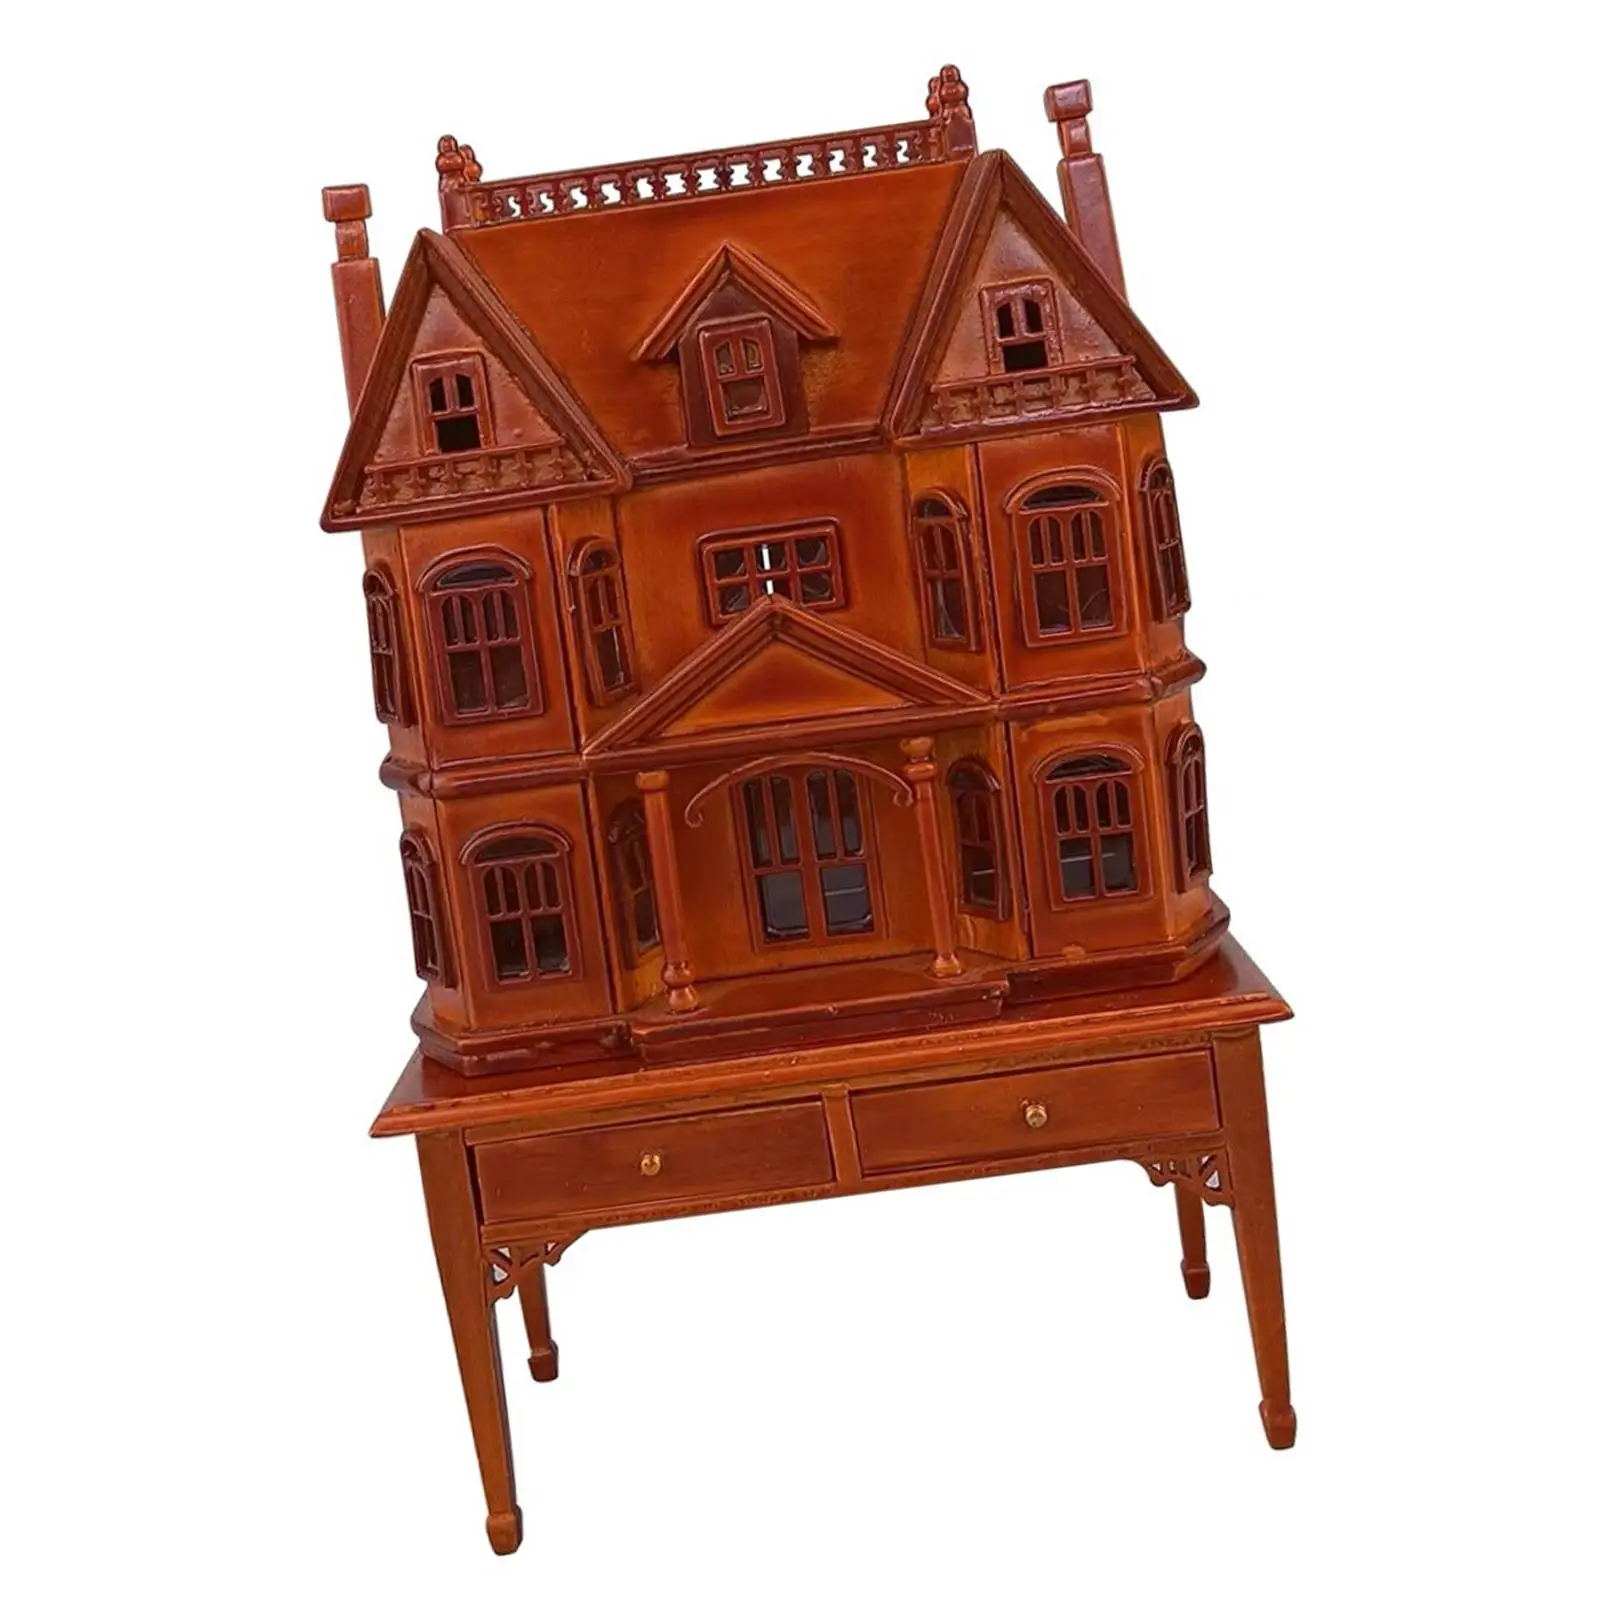 Dollhouse Miniature 1/12 Scale Table Display Cabinet Villa Gifts Creative Wooden